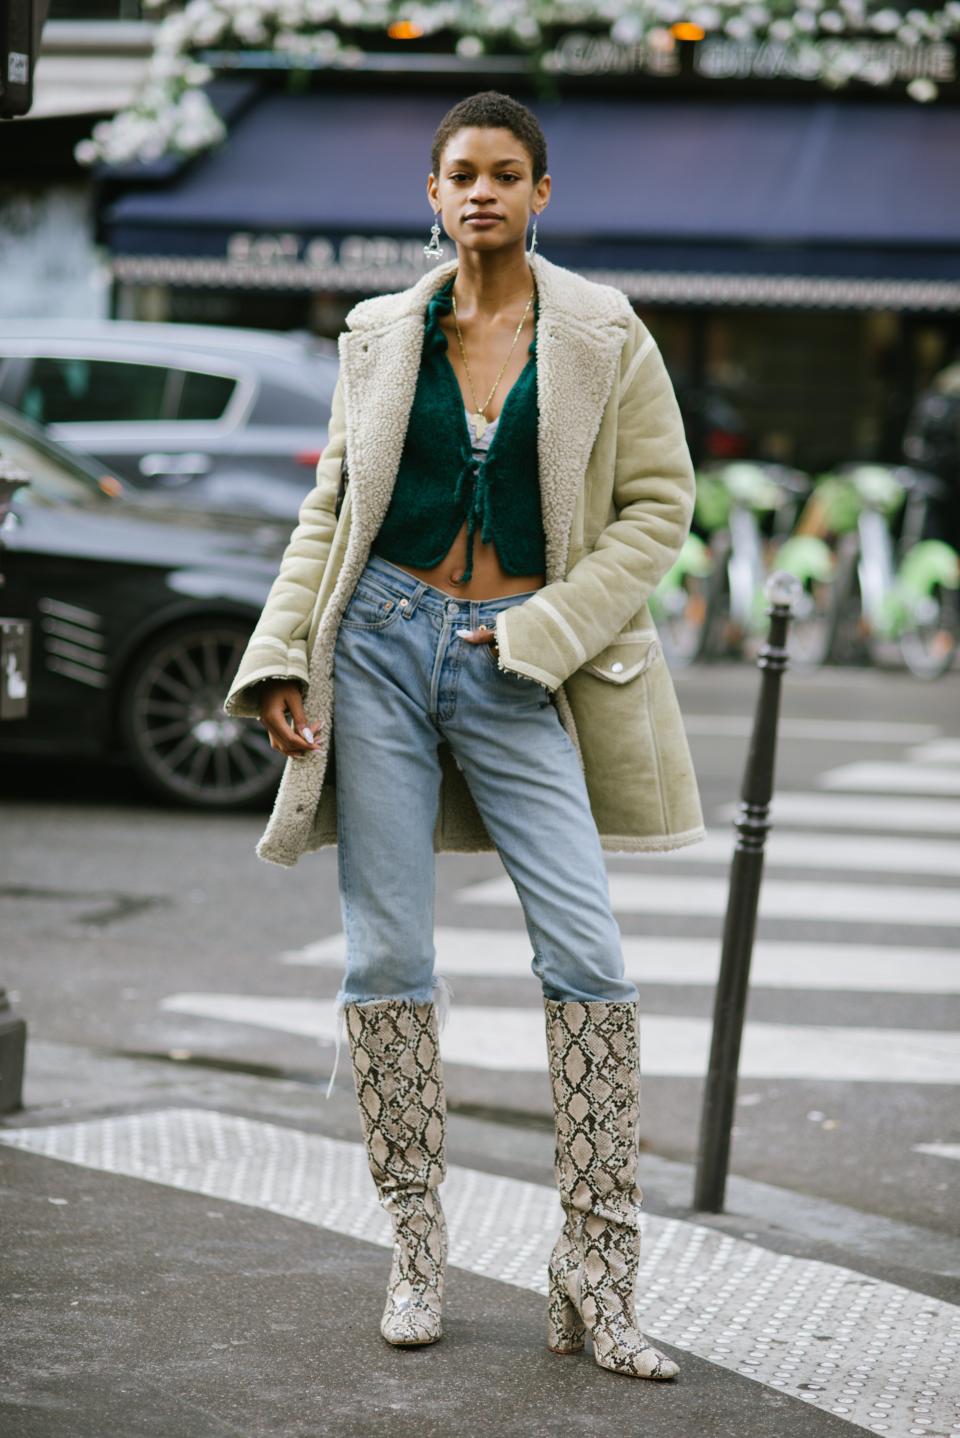 Stay On-Trend With a Green Cardigan